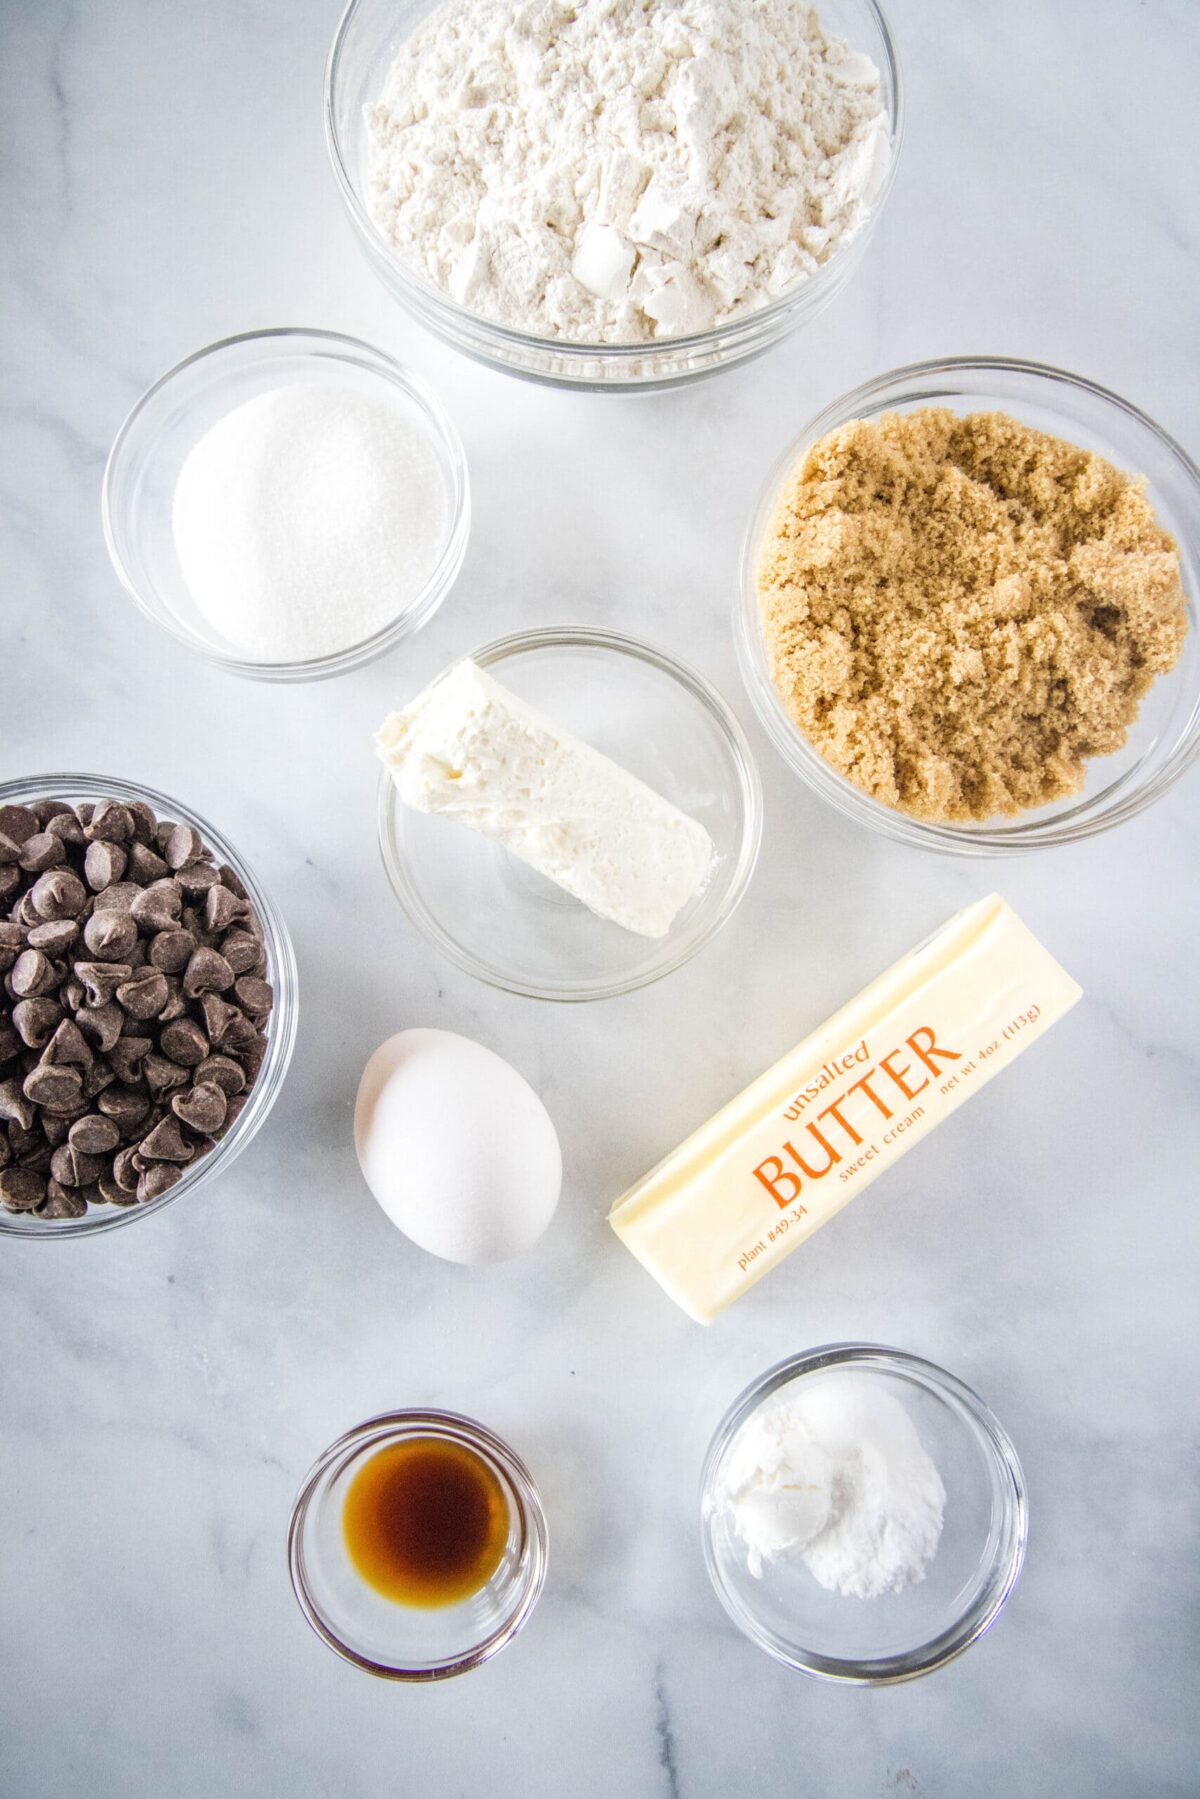 Overhead view of the ingredients needed for cream cheese chocolate chip cookies: a bowl of flour, a bowl of sugar, a bowl of chocolate chips, a bowl of brown sugar, a bowl of cream cheese, a bowl of vanilla extract, a bowl of baking soda and cornstarch, a stick of butter, and an egg